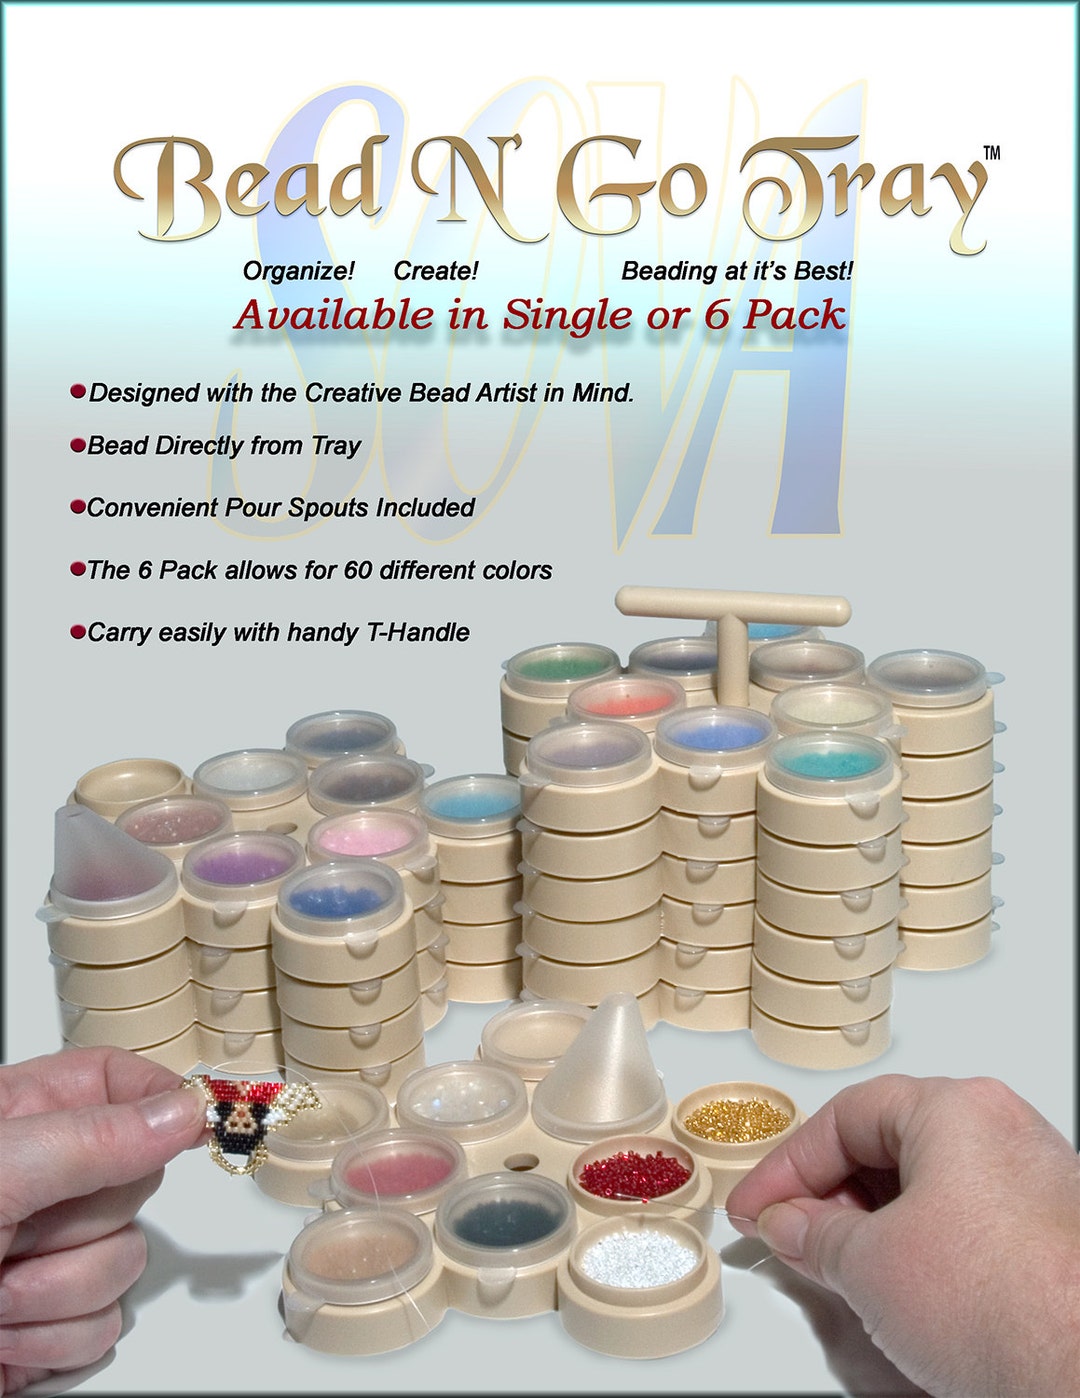 Bead Storage Solution Bead Pavilion Showcase With or Without 4